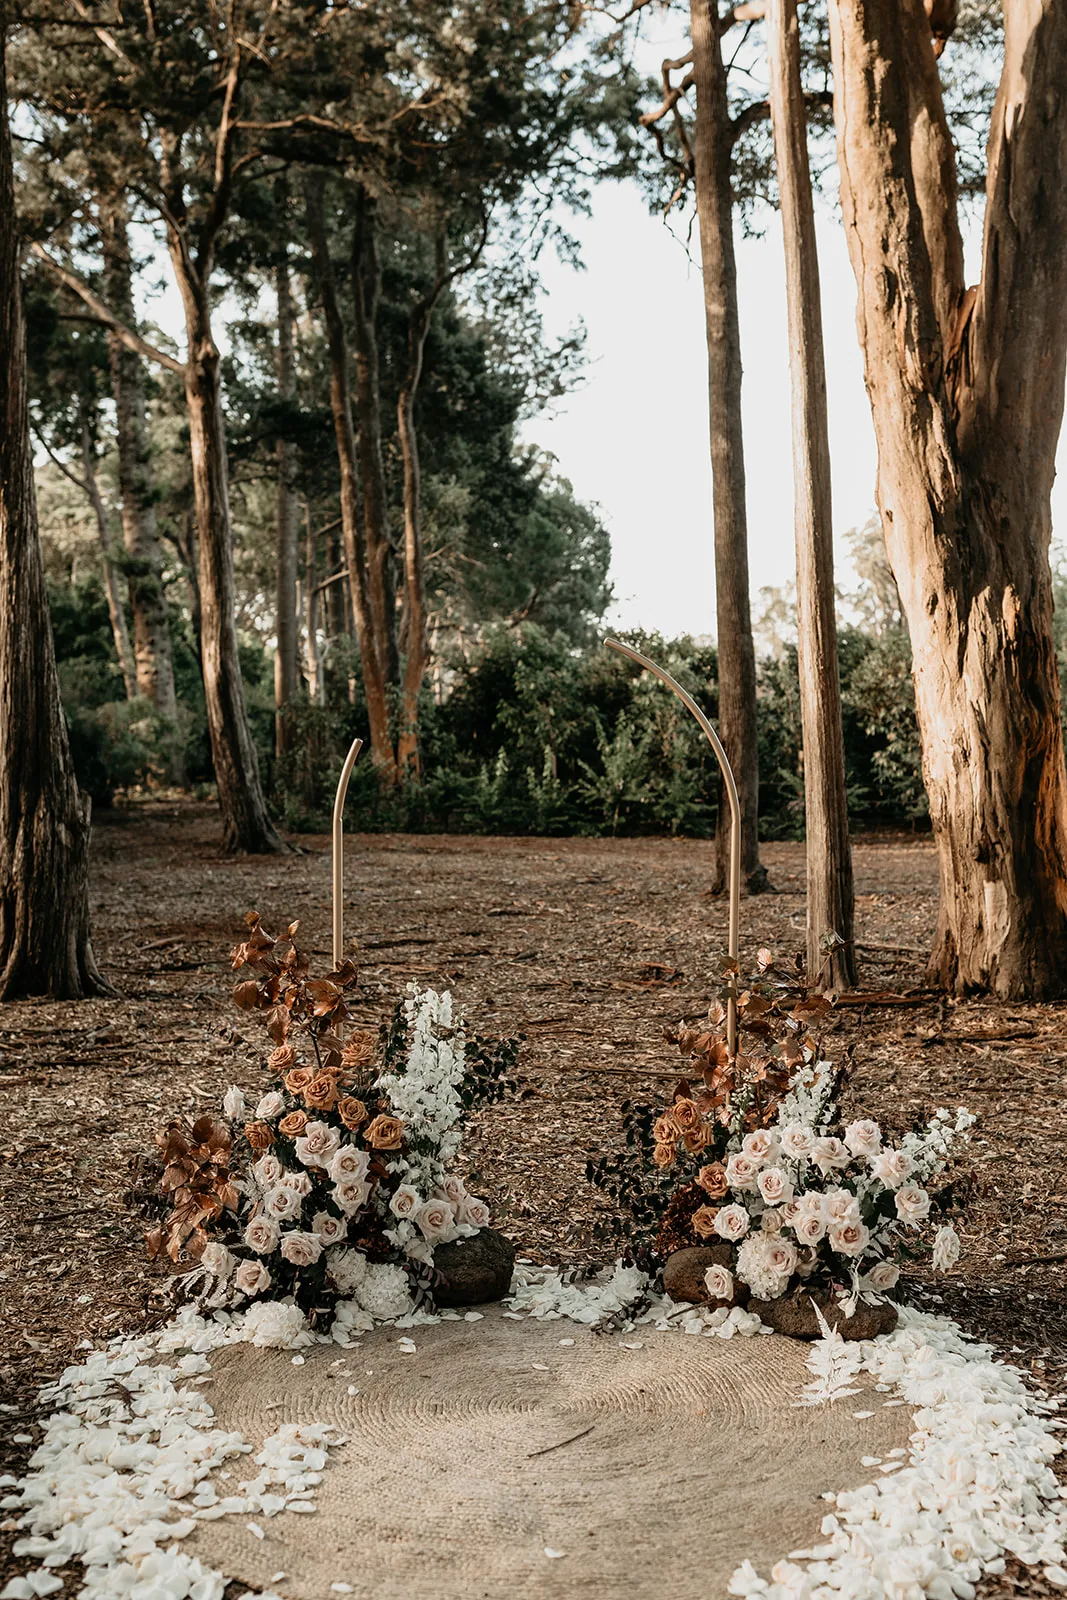 feather and finch photography bohemian styled wedding shoot gold coast bridal gowns florals outdoors